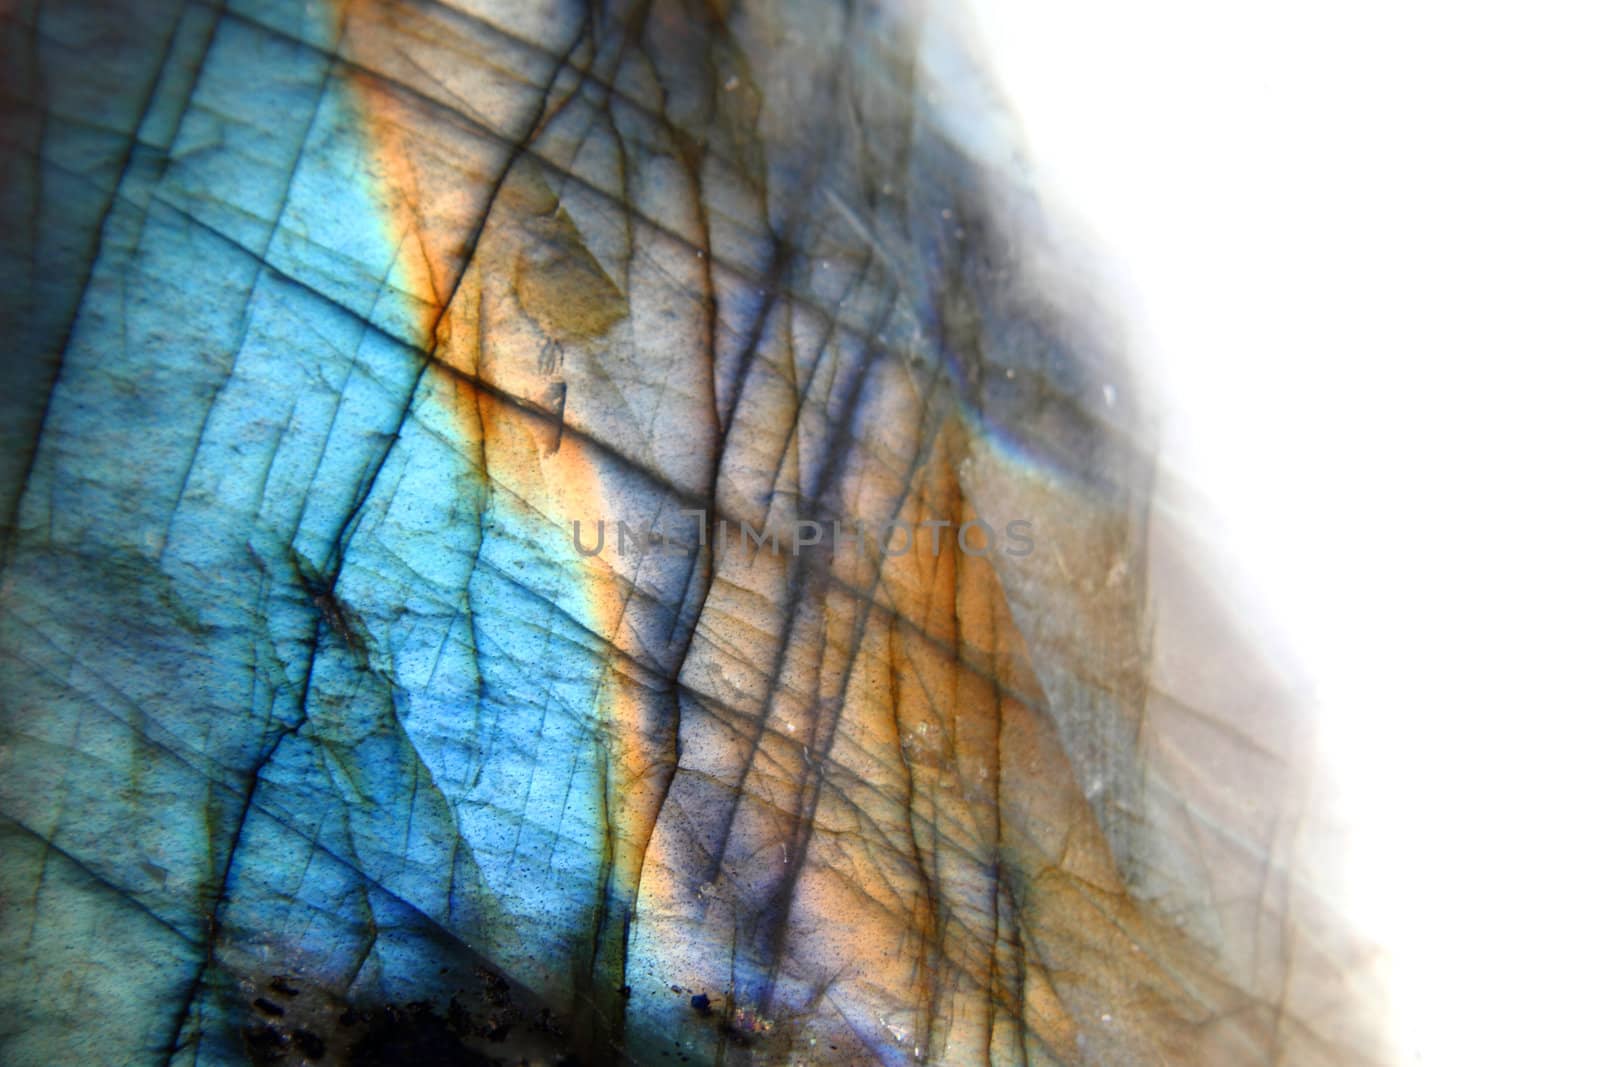 labradorite mineral as very nice natural background